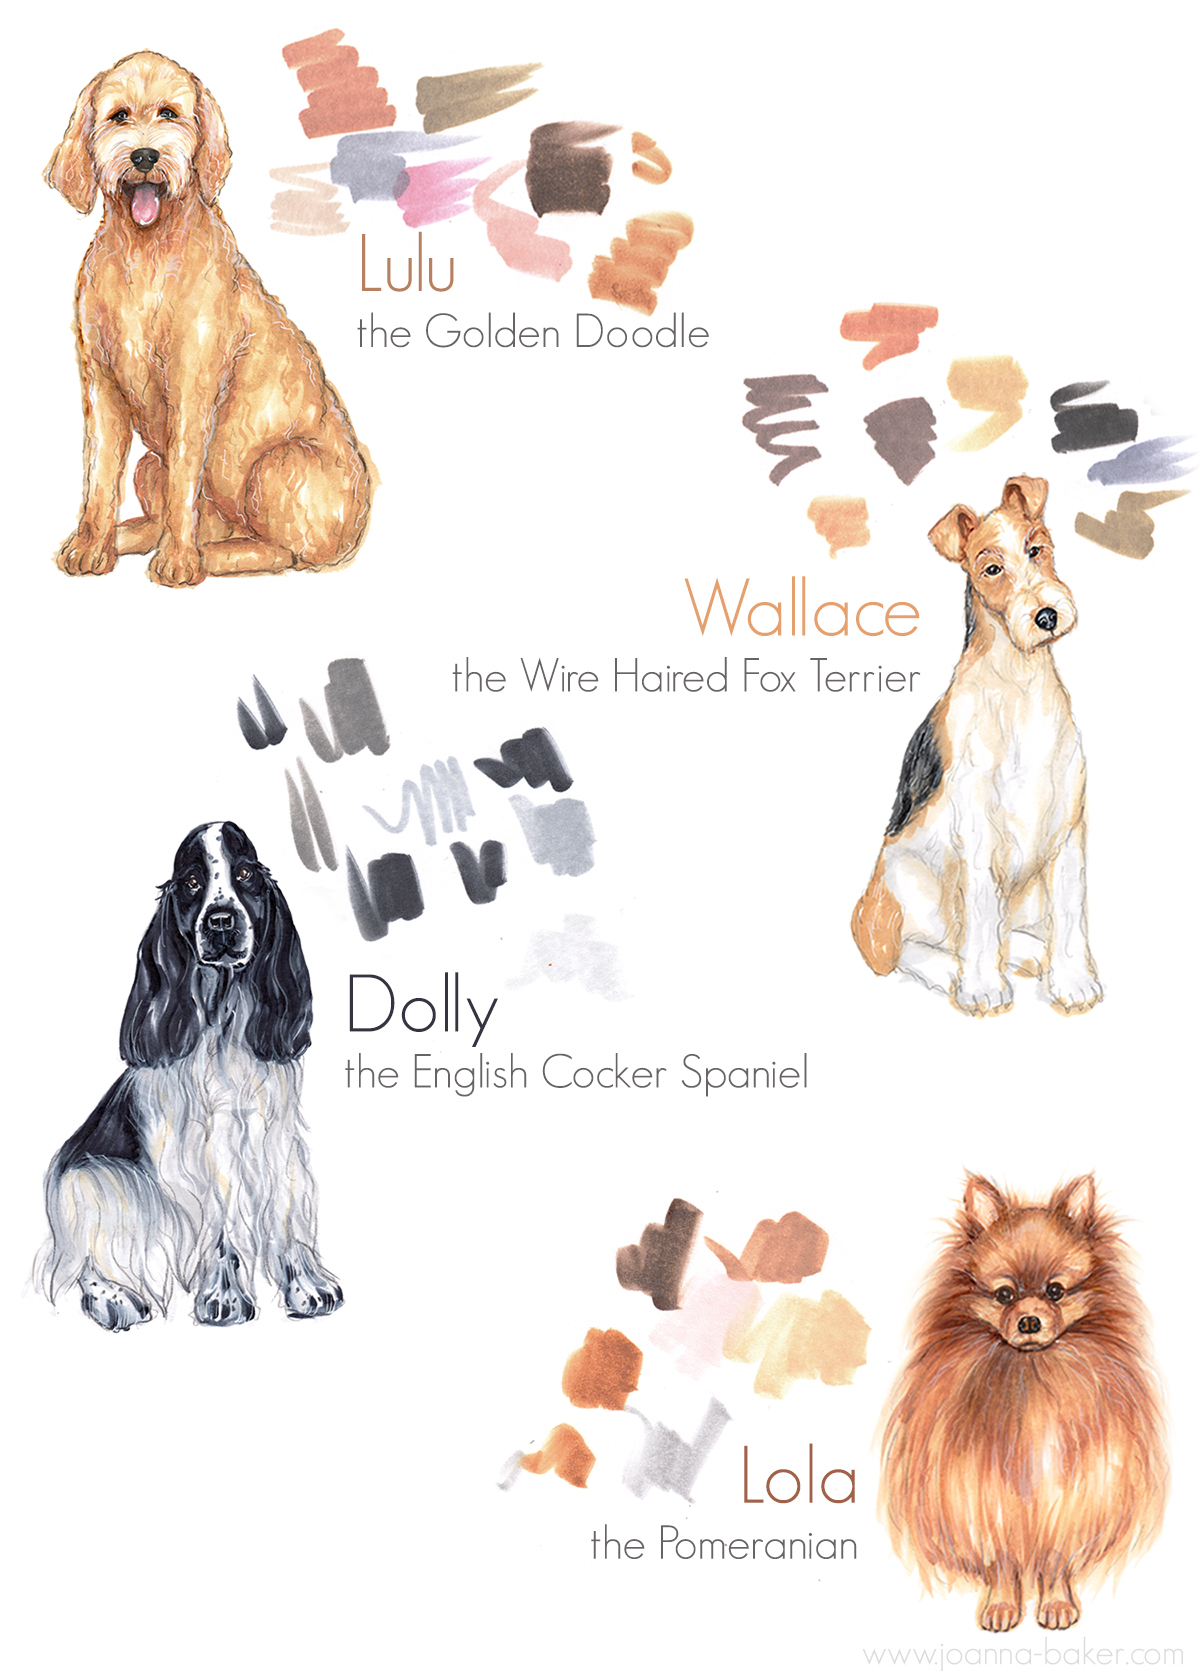 Meet the New Dogs! Illustration by Joanna Baker